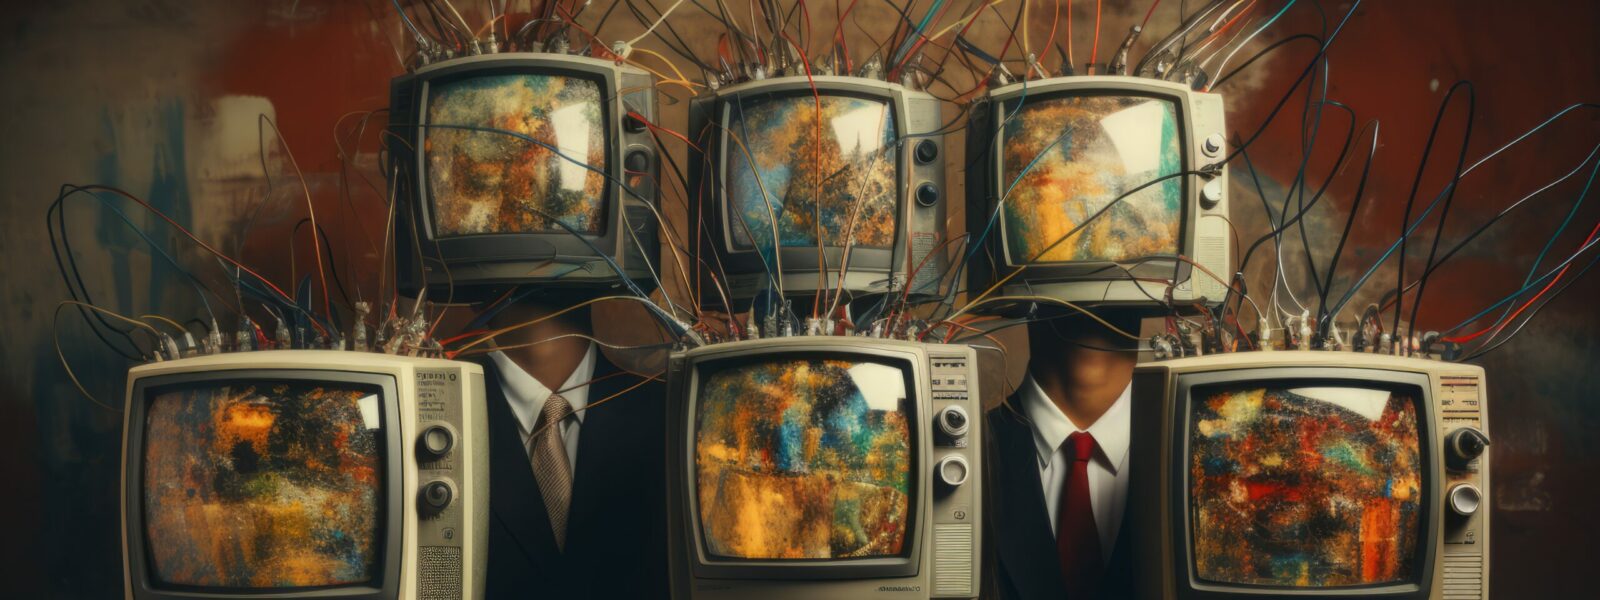 A chilling collage of human figures with retro TV heads, standing zombie-like, portraying censorship, disinformation, and the blind following of mass media.